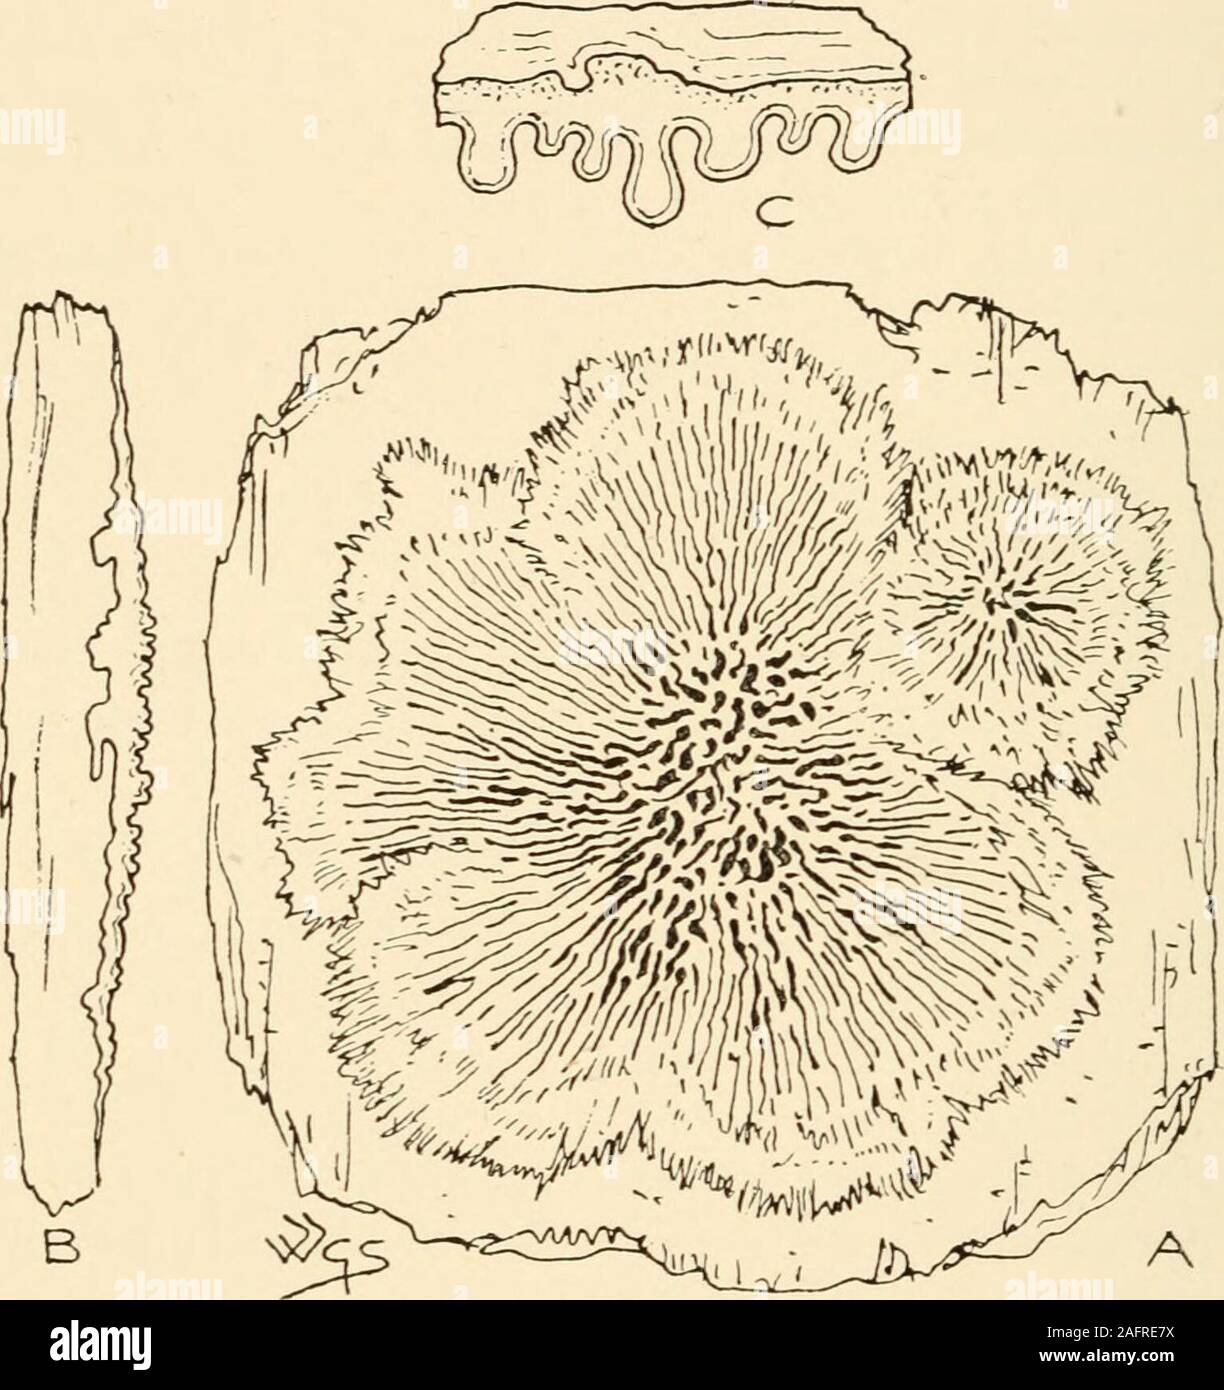 . Synopsis of the British Basidiomycetes ; a descriptive catalogue of the drawings and specimens in the Department of botany, British museum. nd, varied,entire, sometimes crested, white to sienna-white.Chiefly on bark, rarely underneath, sometimes on birch. Nov.-Mar. 5§ in. RaJulum aterrimum Fr. is not a Basidiomycete but apparently one of theDci)iatic(C Under the microscope the appearance is that of conceptaclesof Rhizoctonia crocoritm, but it bears 1-4-septate brown spores afterthe manner of Cladosporium ; the fruiting branches are compacted togetherand take the form of short, obtuse teeth, Stock Photo